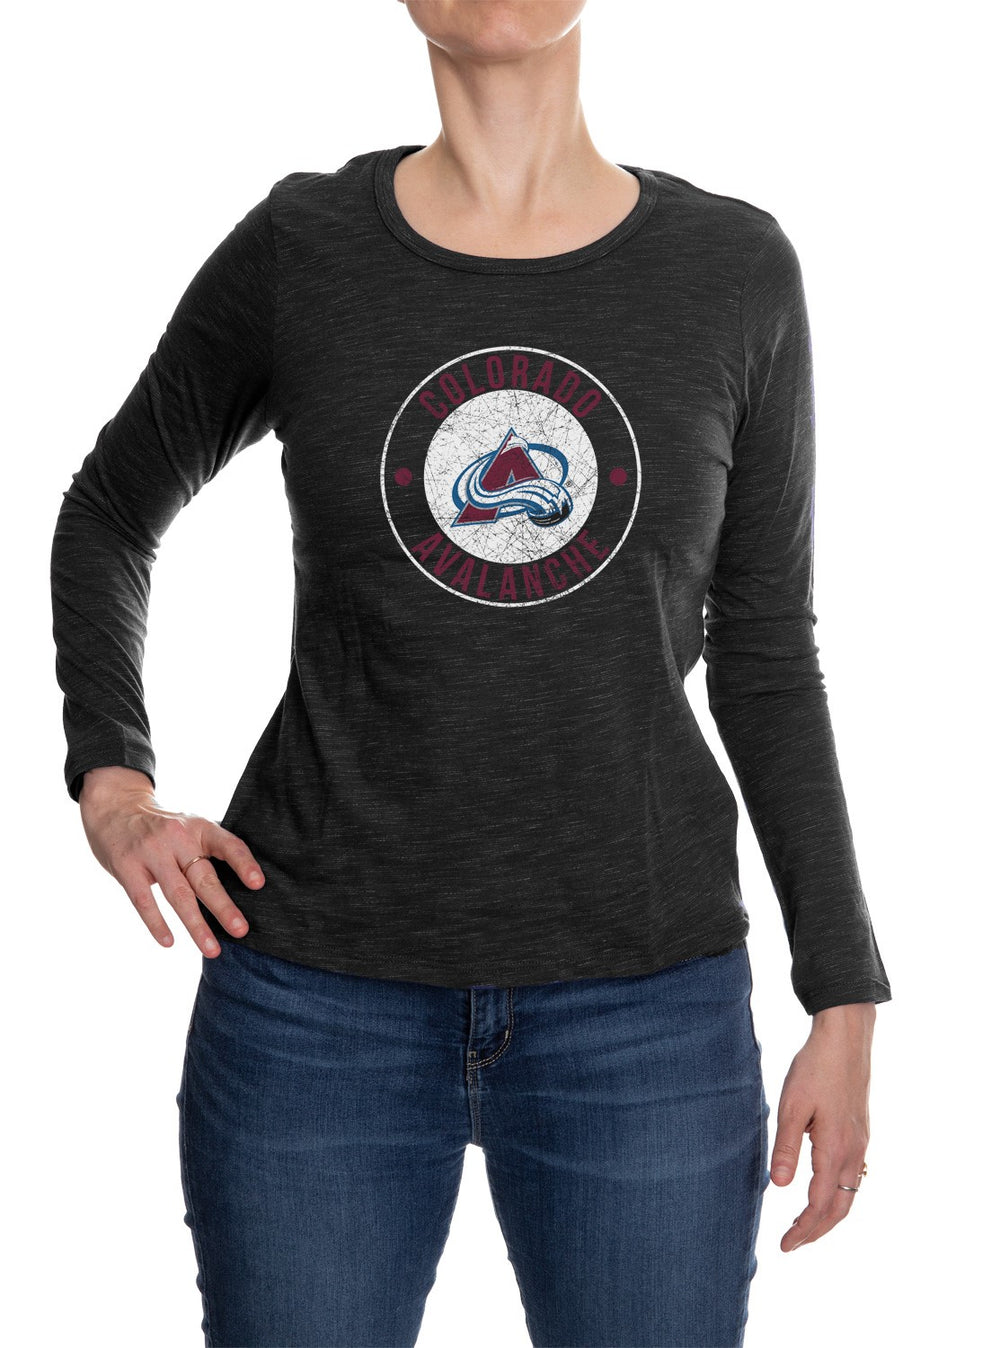 Colorado Avalanche Distressed Logo Long Sleeve Shirt for Women in Black Front View